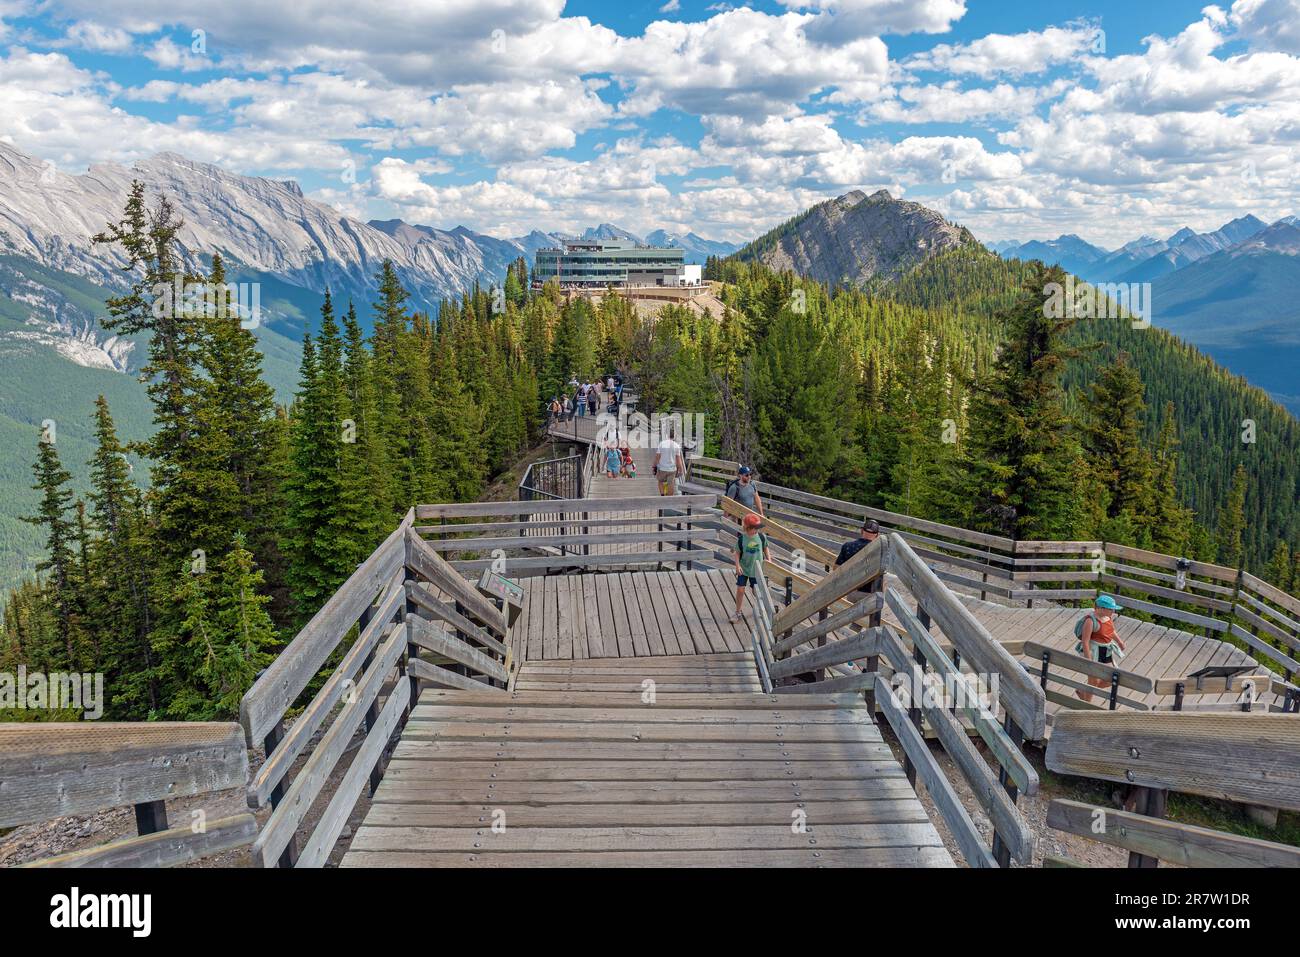 People hiking the Sulphur Mountain hiking trail after Banff Gondola cable car, Banff national park, Canada. Stock Photo